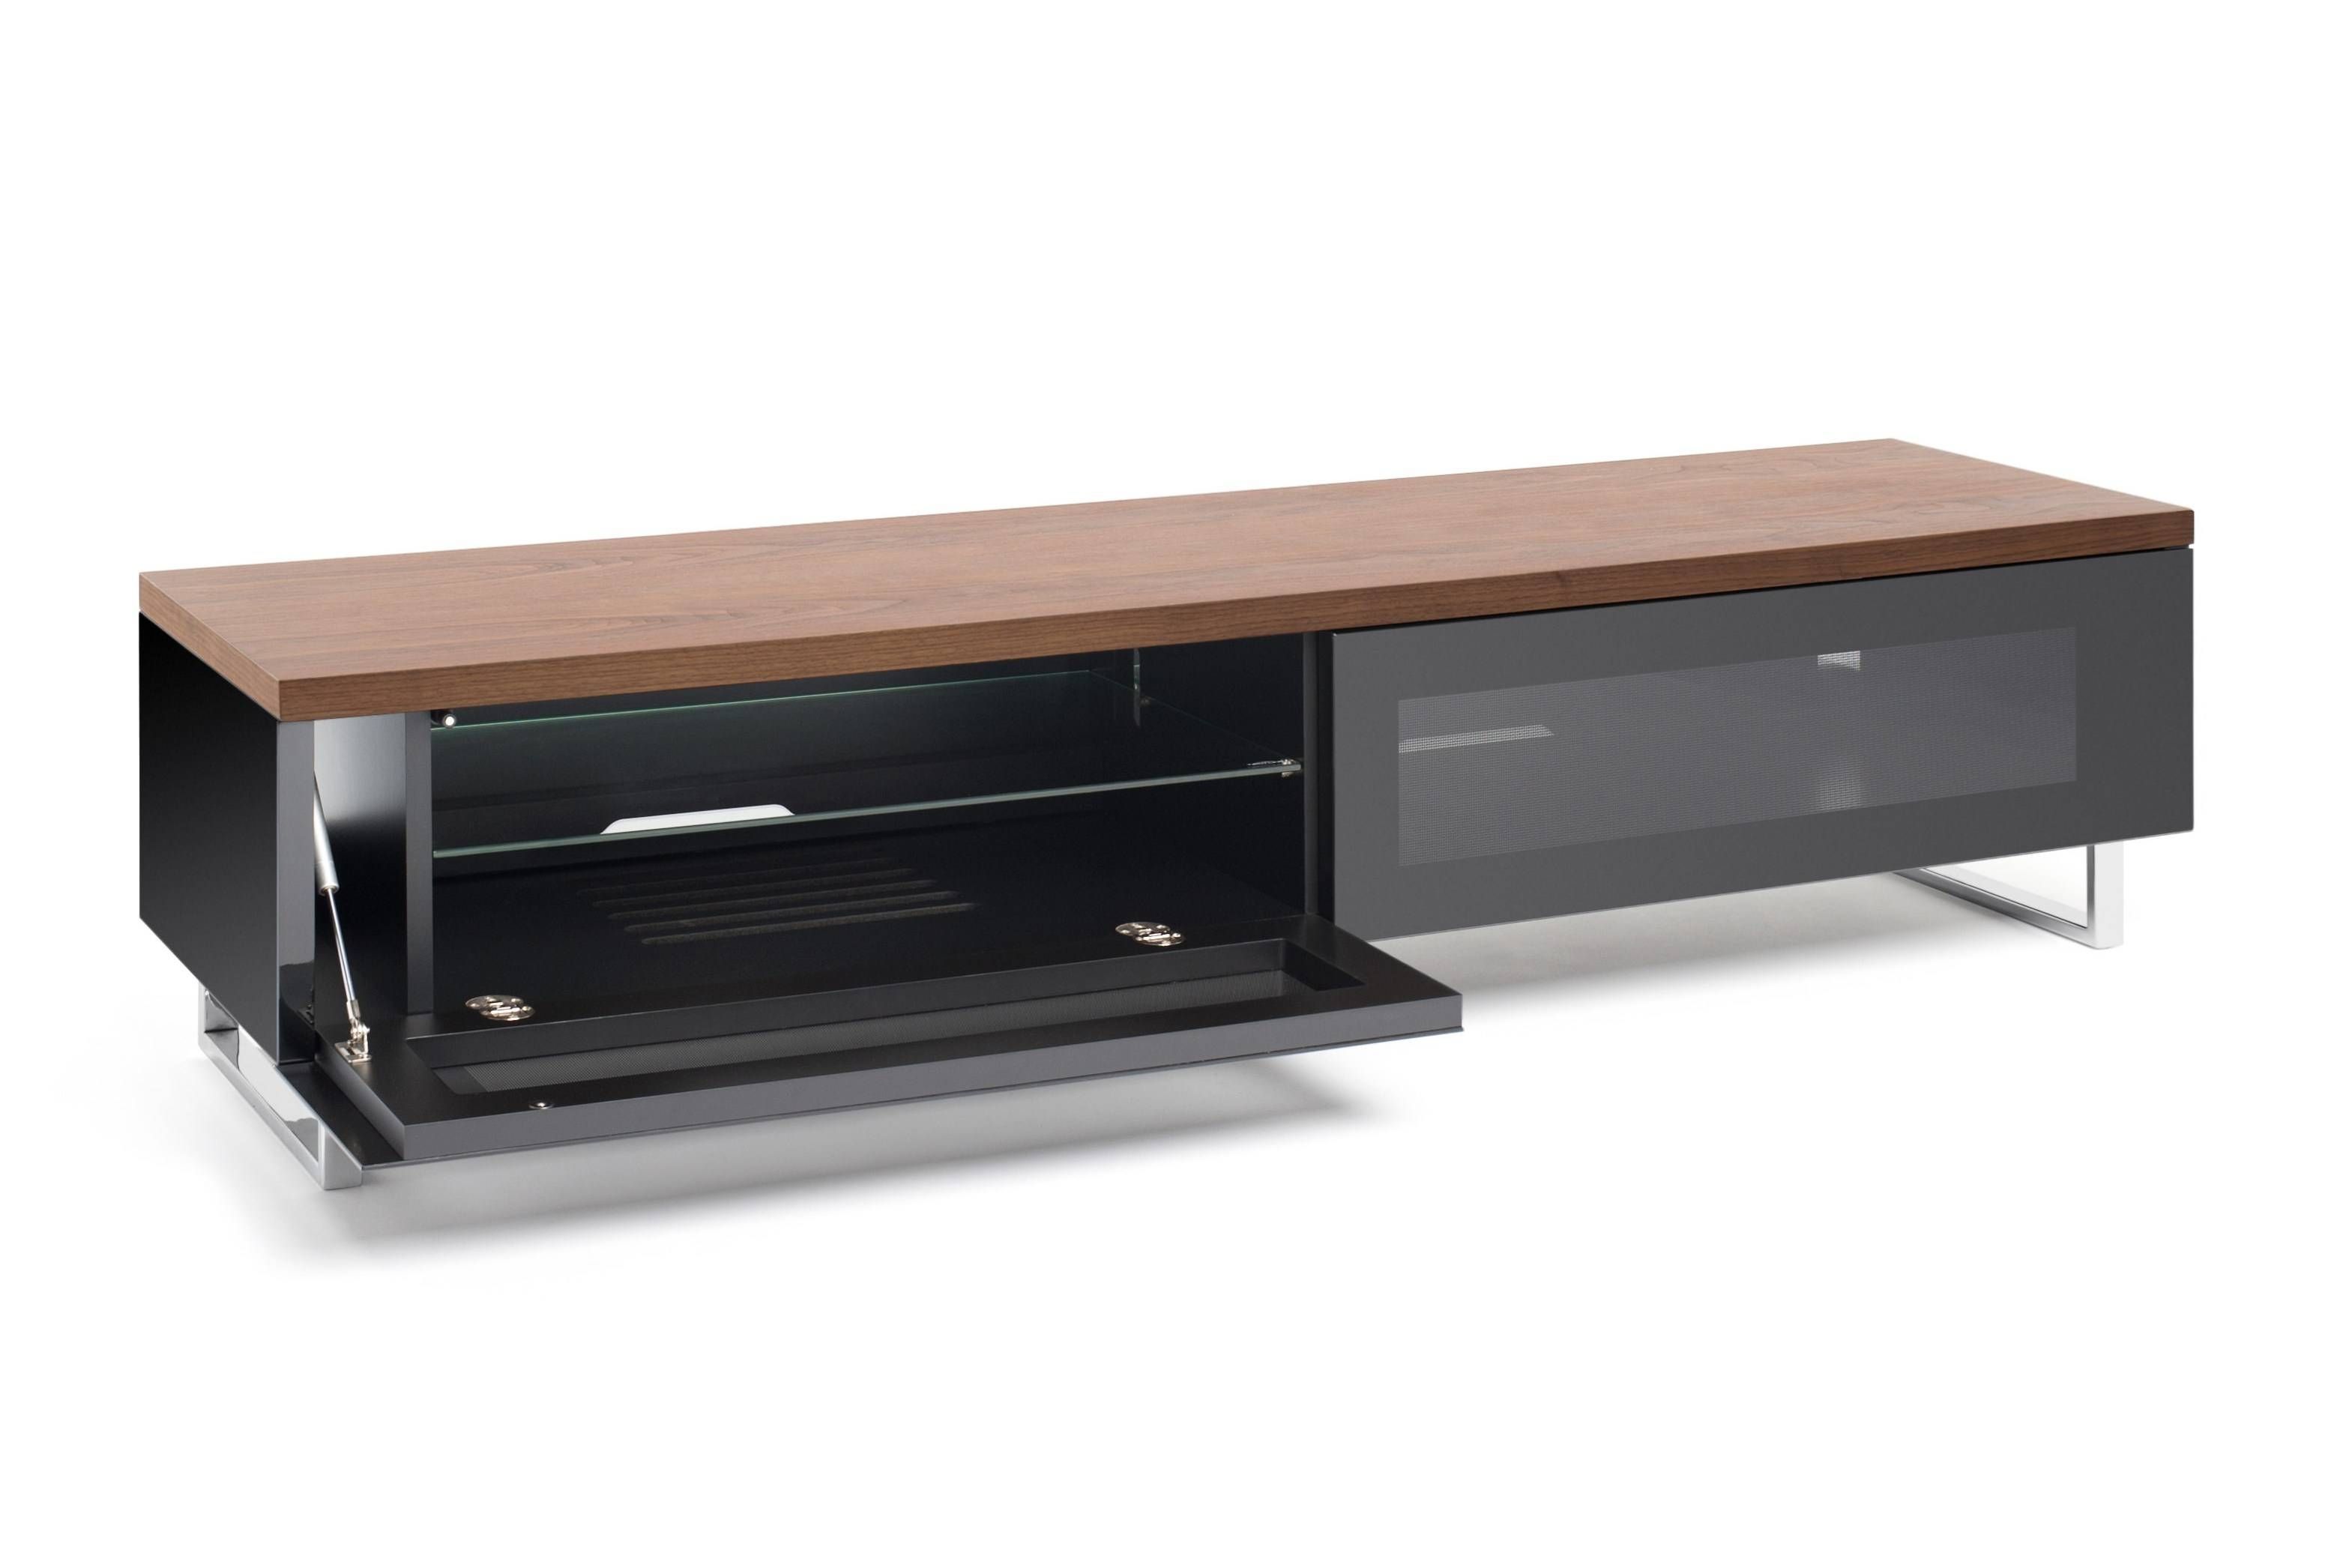 Best Modern Low Profile Tv Stand 58 About Remodel New Trends With Within Modern Low Profile Tv Stands (View 3 of 15)